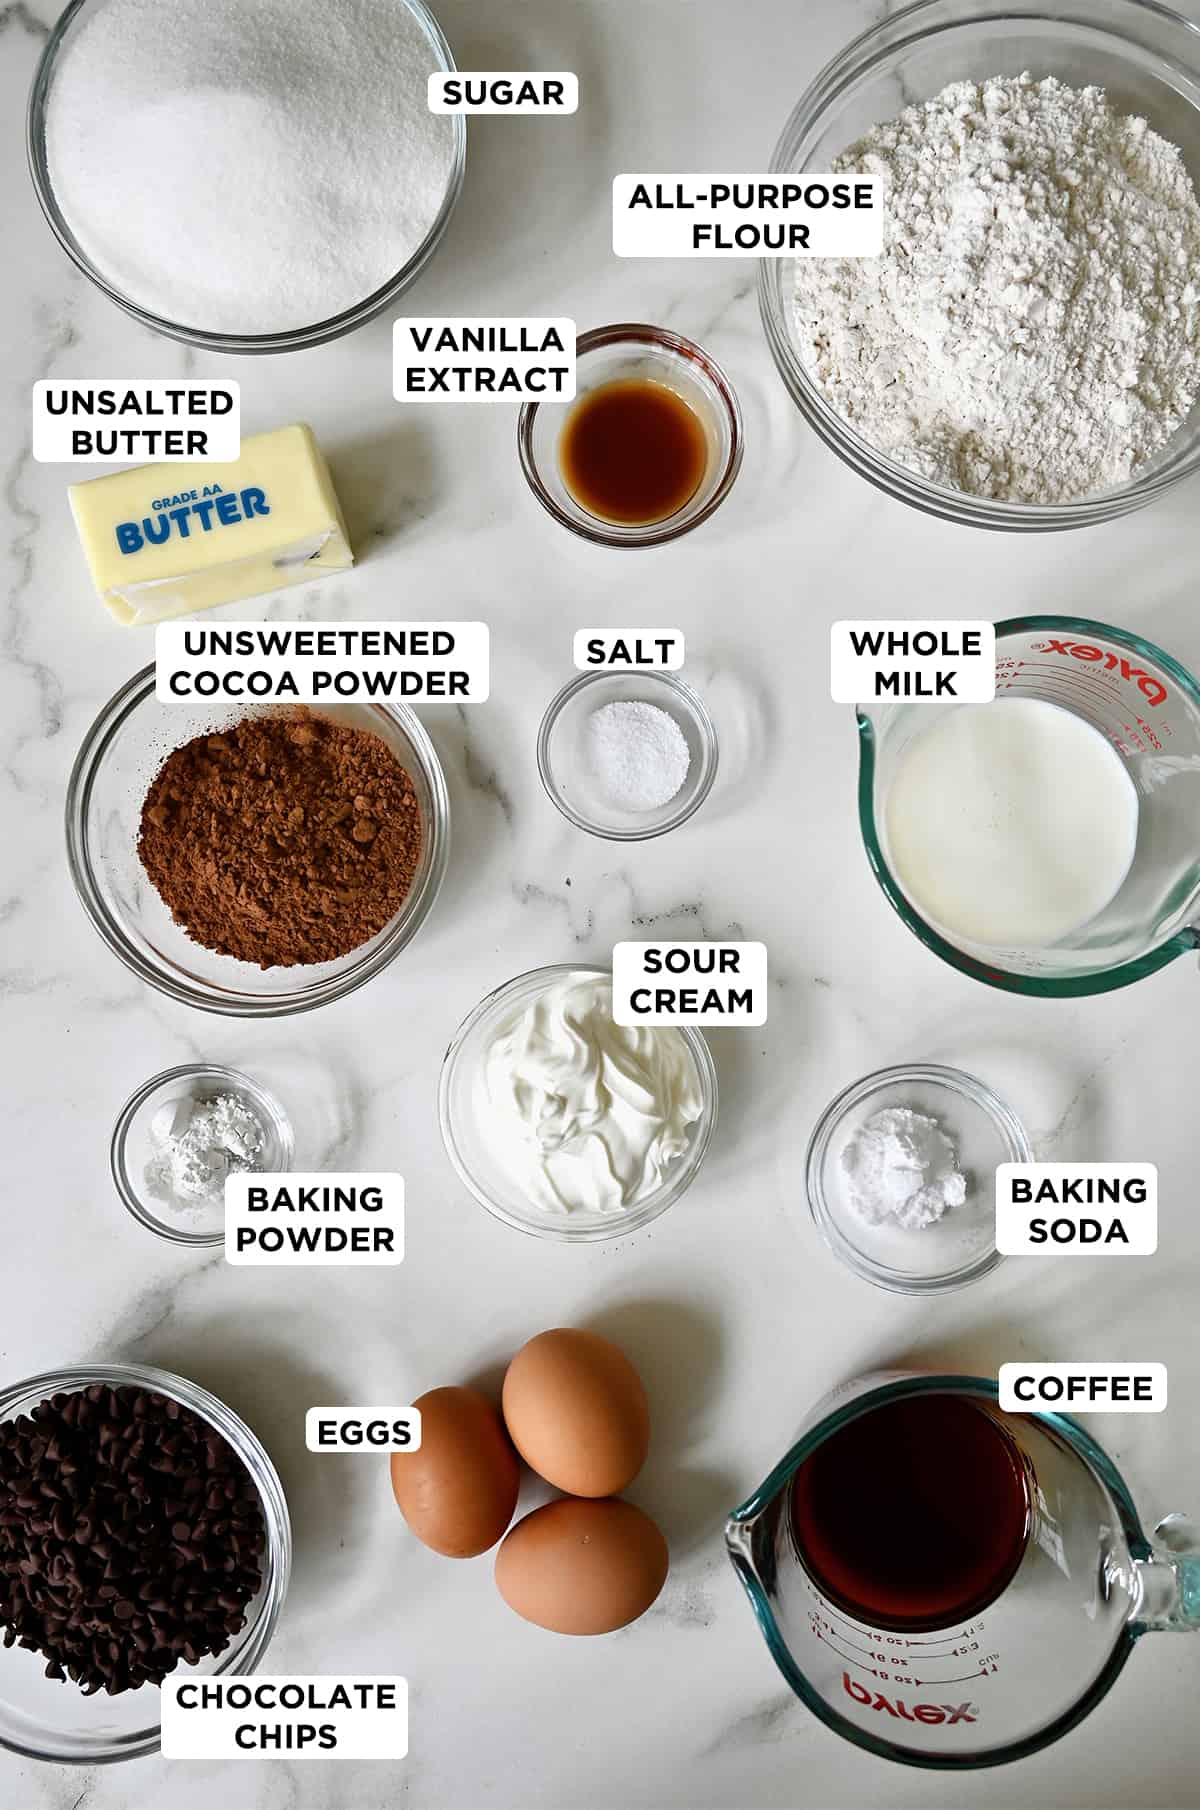 Chocolate cake ingredients in various sizes of glass bowls, including mini chocolate chips, baking powder, unsweetened cocoa powder, butter, sugar, vanilla extract, flour, salt, whole milk, sour cream, baking soda, coffee and three eggs.